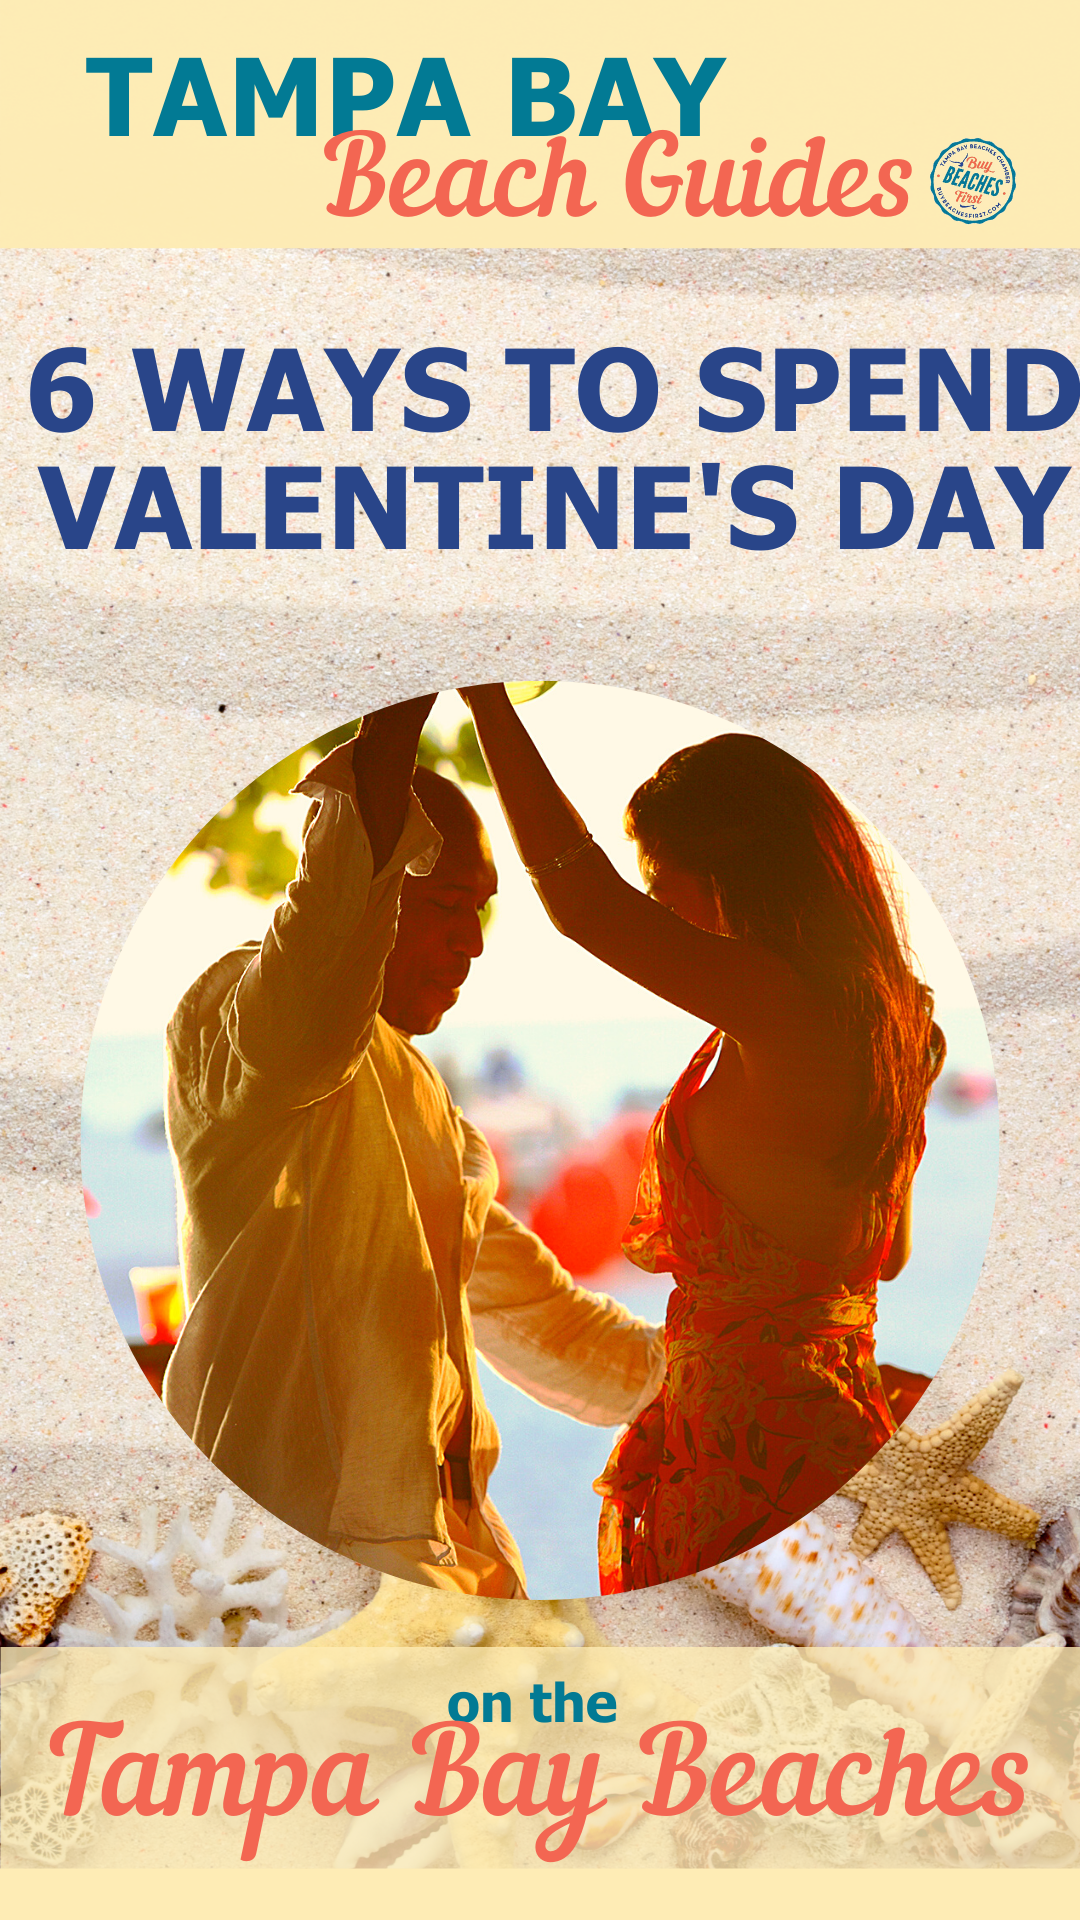 Image for 6 Ways to Spend your Valentine’s Day on the Tampa Bay Beaches